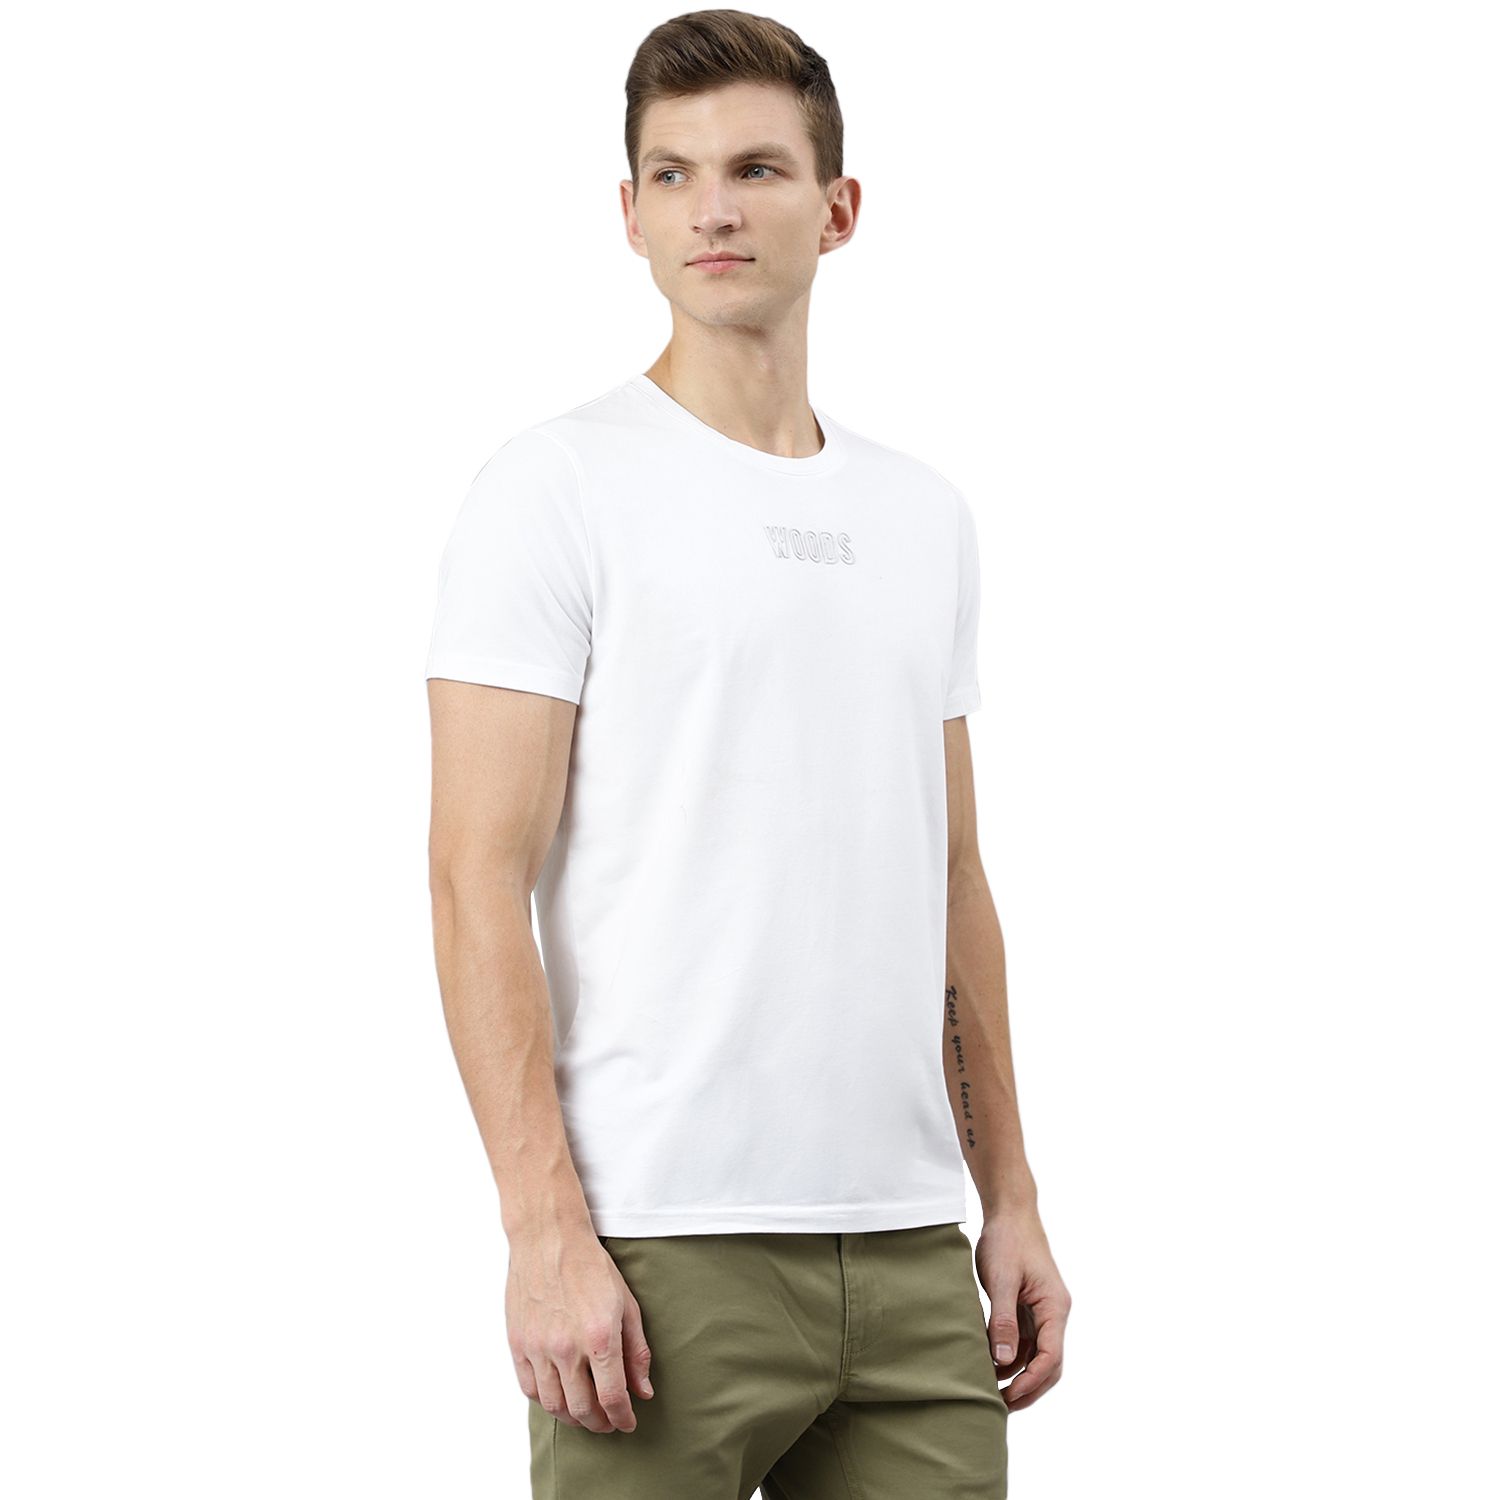 white t shirt for men 915 mrp 1 695 46 % off prices include taxes color ...